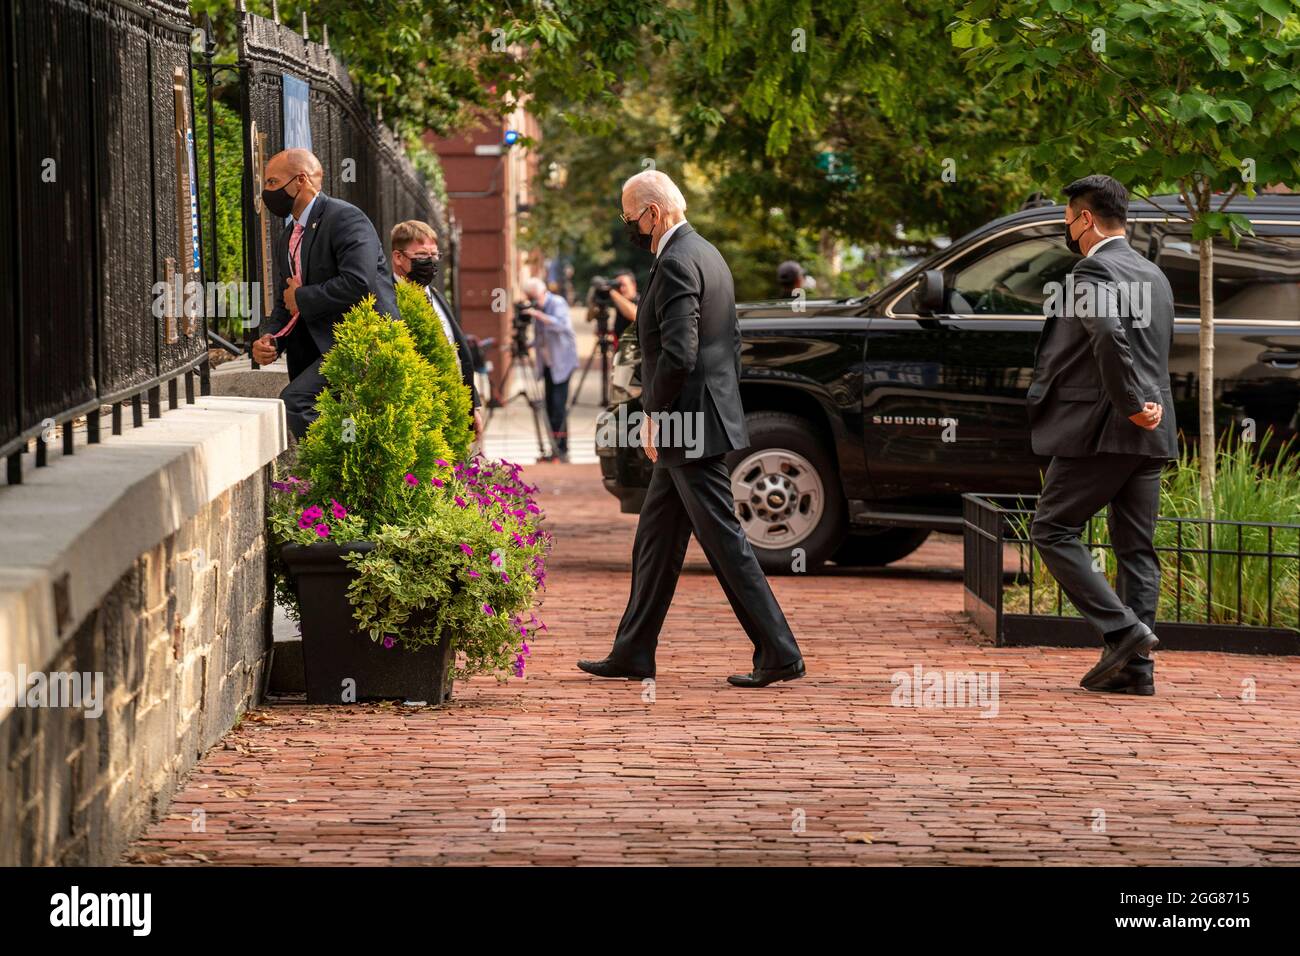 United States President Joe Biden walks into Holy Trinity Catholic Church for mass in the Georgetown neighborhood of Washington, DC, Sunday, August 29, 2021. President Biden earlier attended a dignified transfer in Dover, Delaware for 13 members of the US military who were killed in Afghanistan last week and gave an update on Hurricane Ida from FEMA headquarters. Credit: Ken Cedeno/Pool via CNP Stock Photo